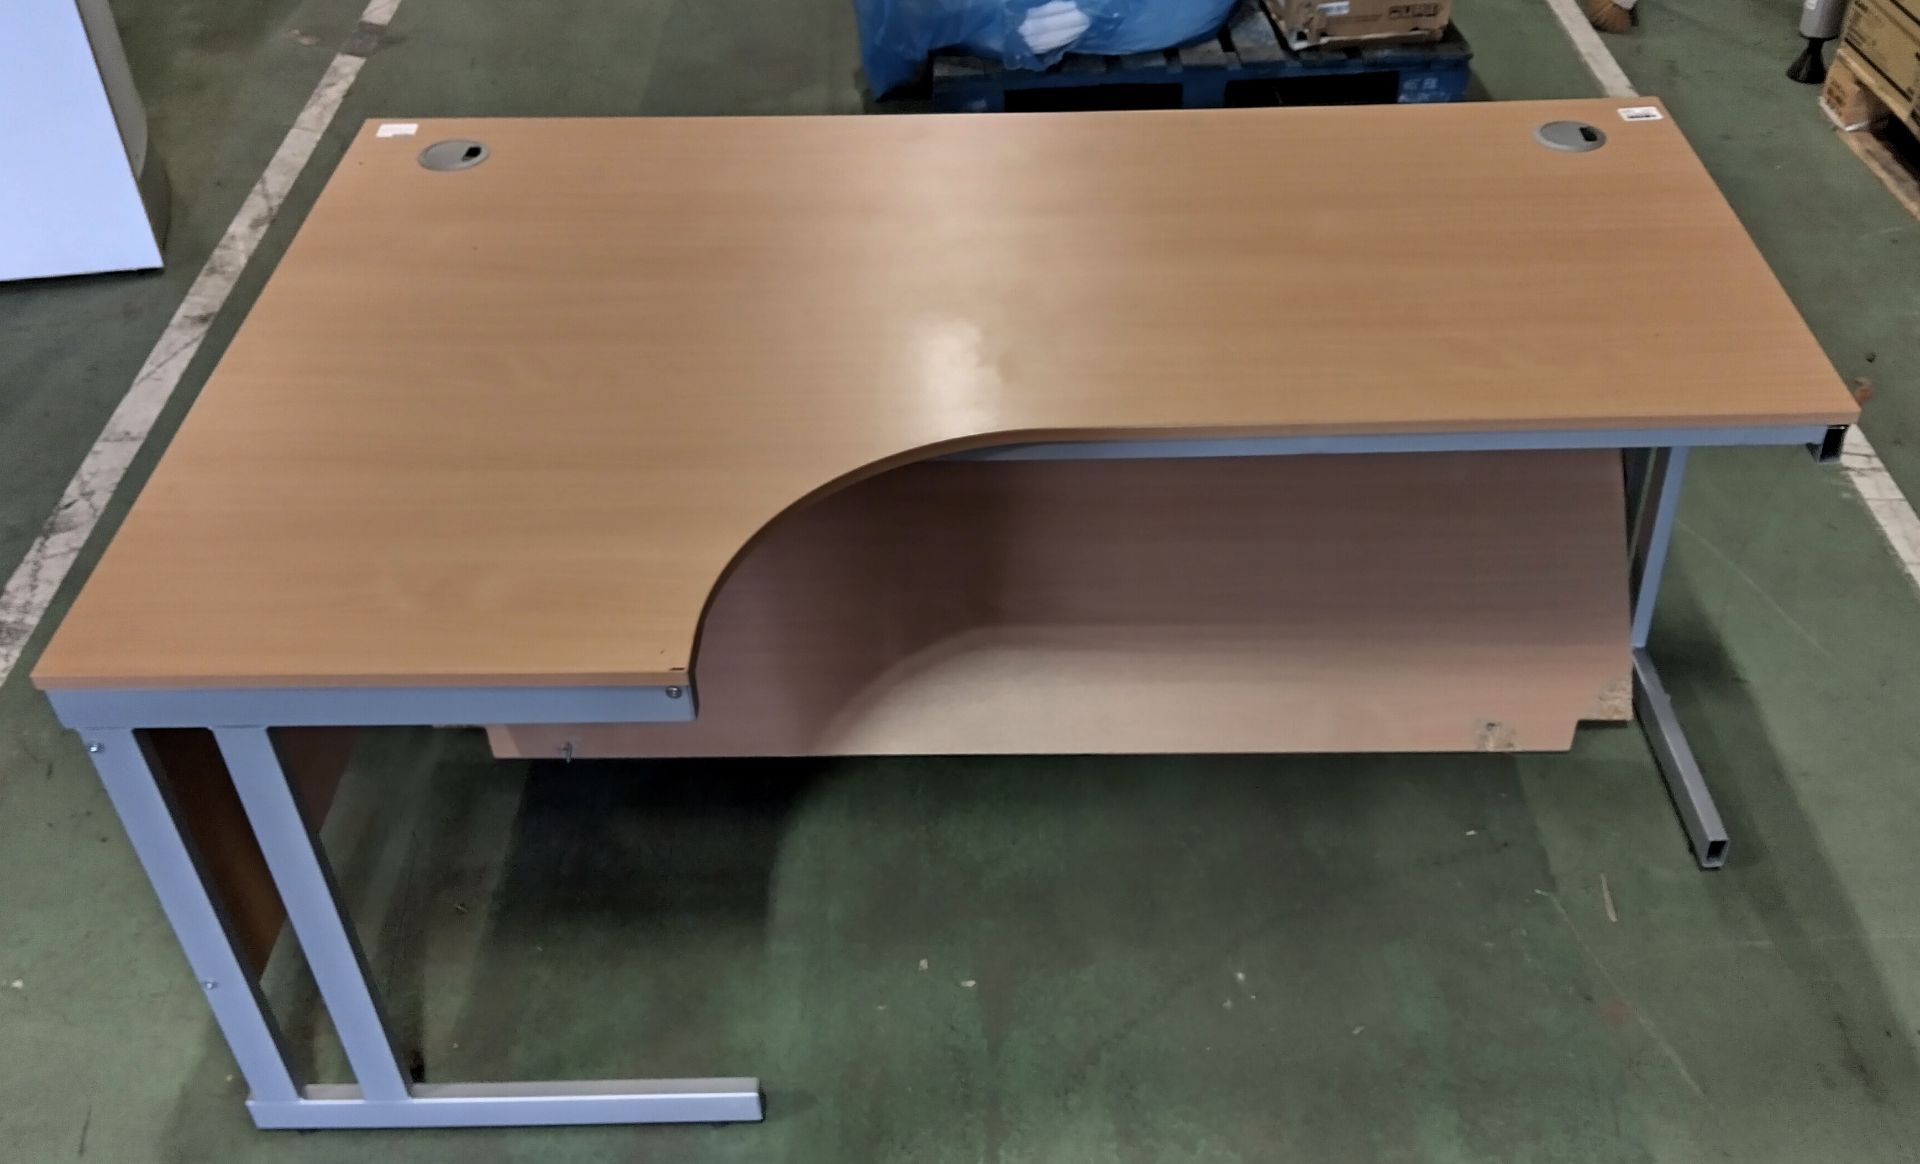 Large curved wooden office scoop desk - L 1800 x W 800 x H 730 - in need of repair - Image 2 of 2